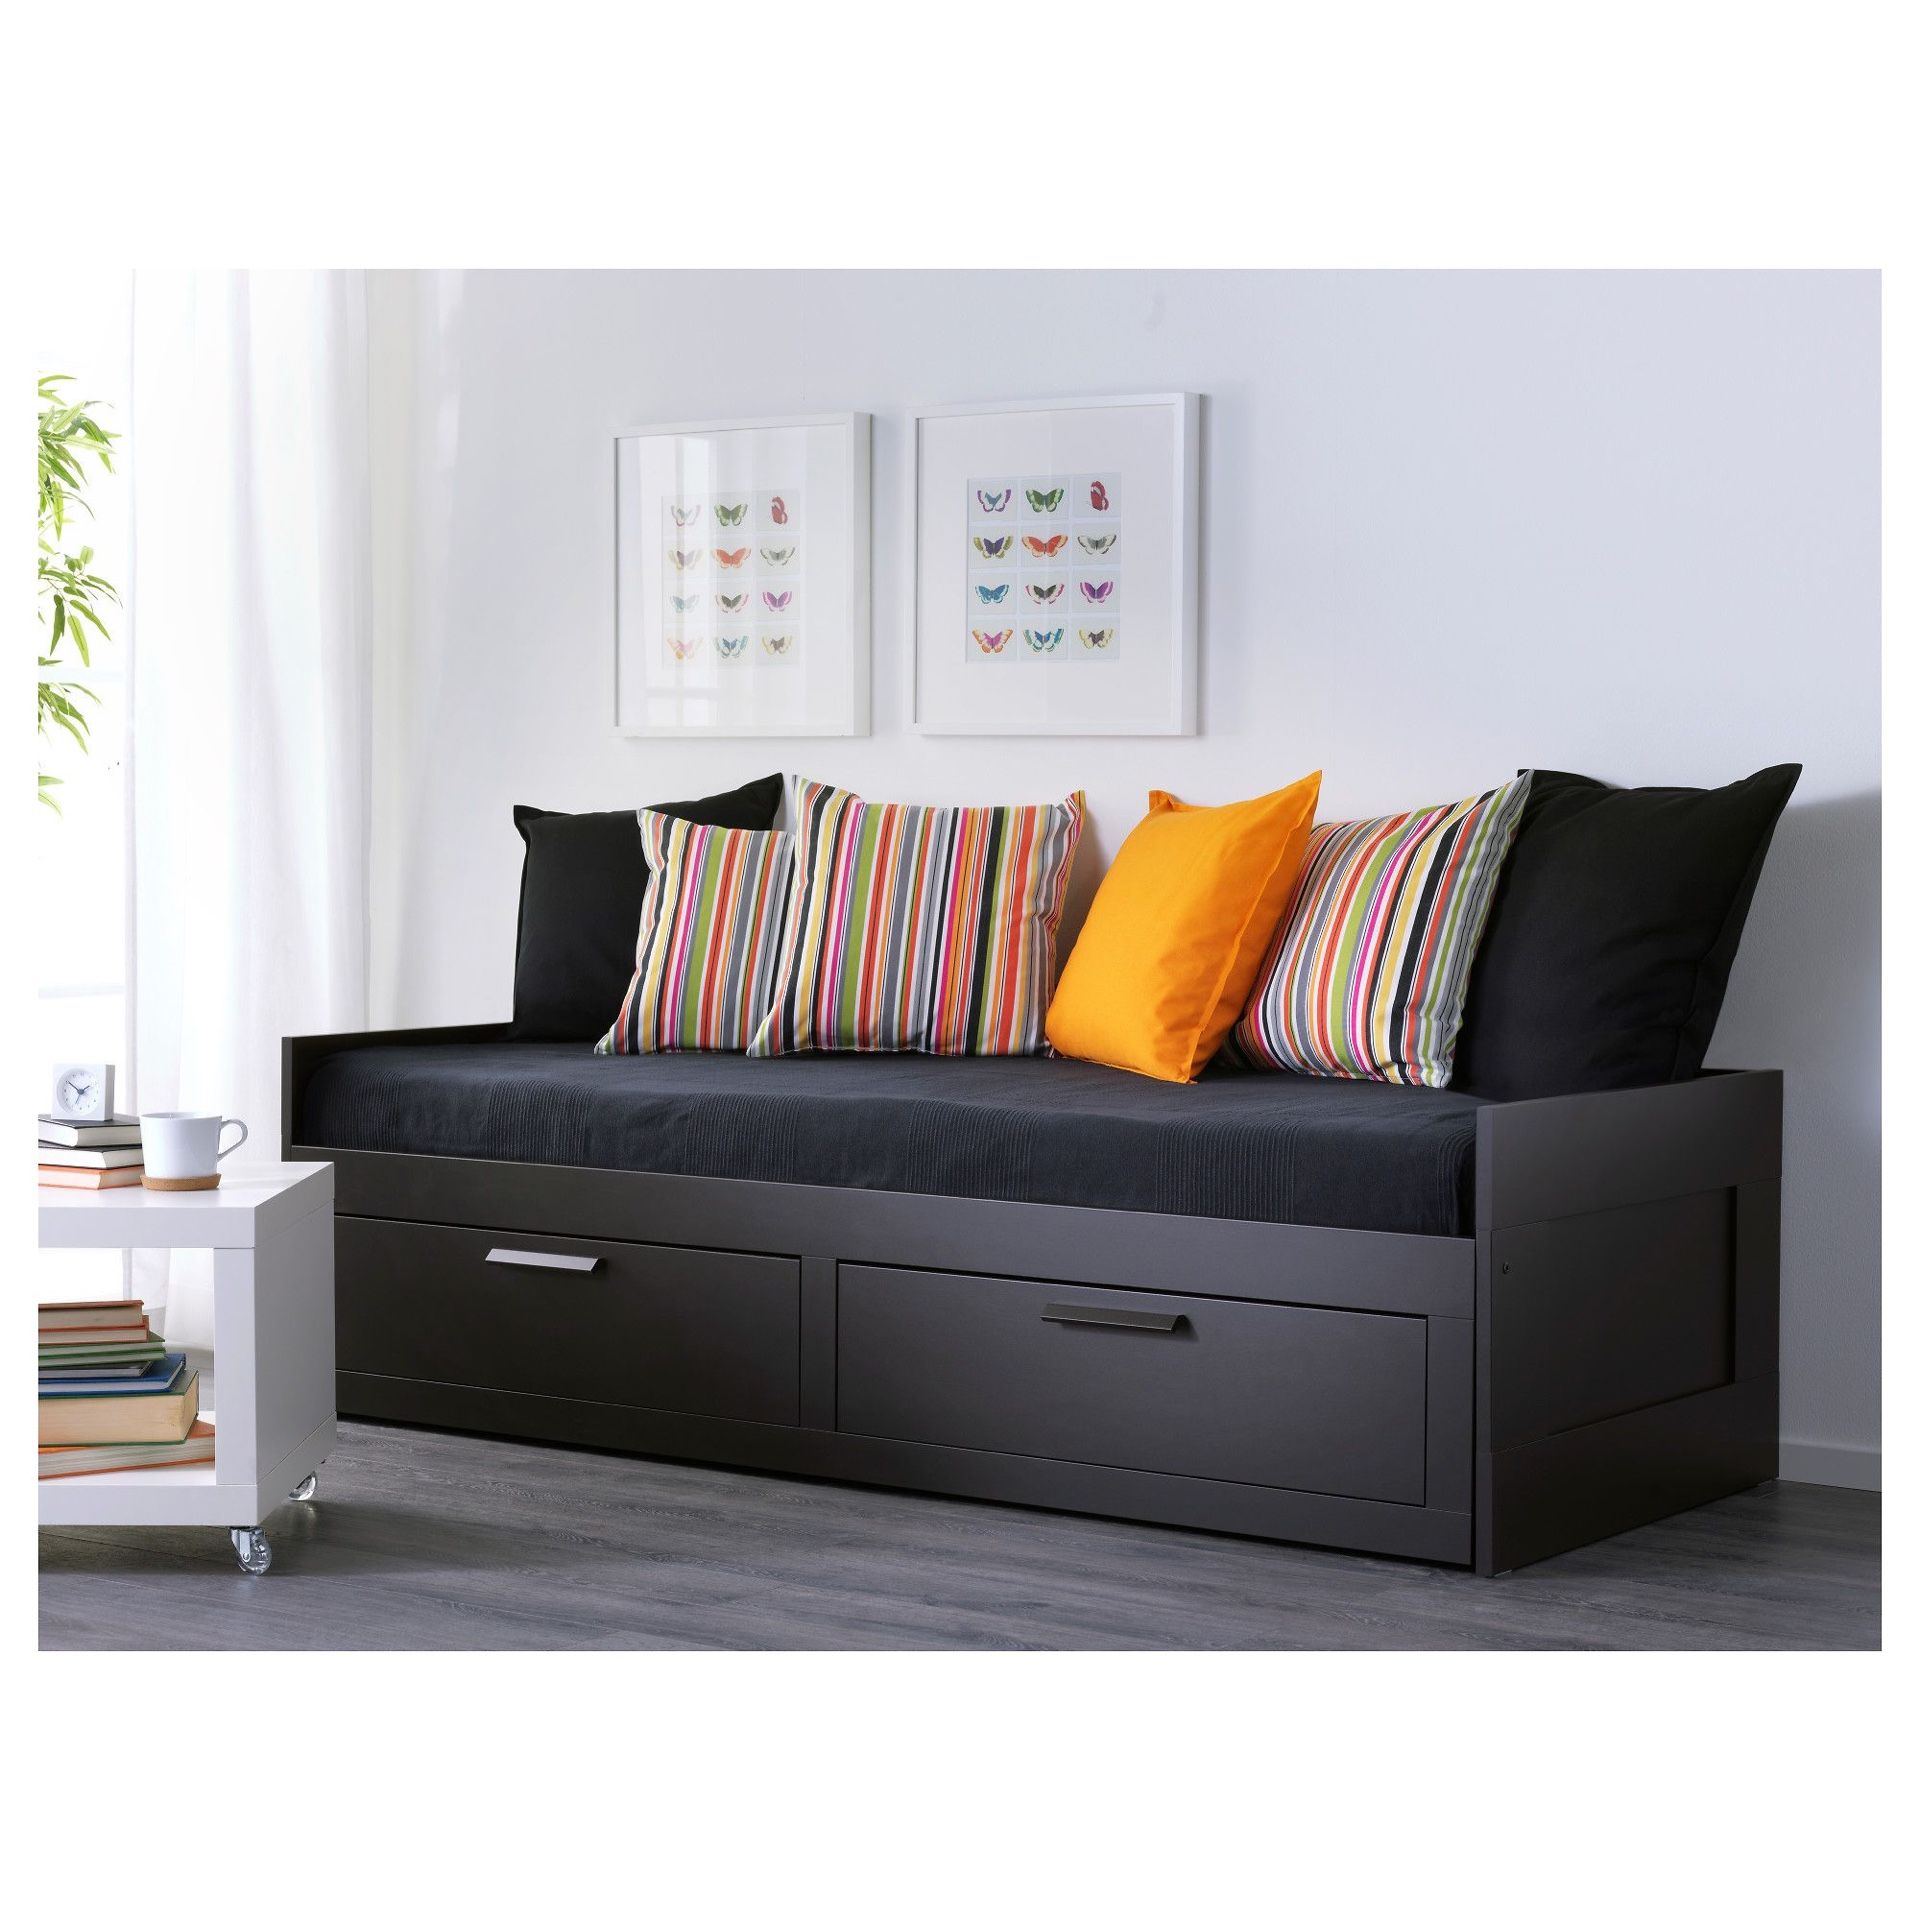 Black Twin Size Bed Frame With 2 Drawers and trundle